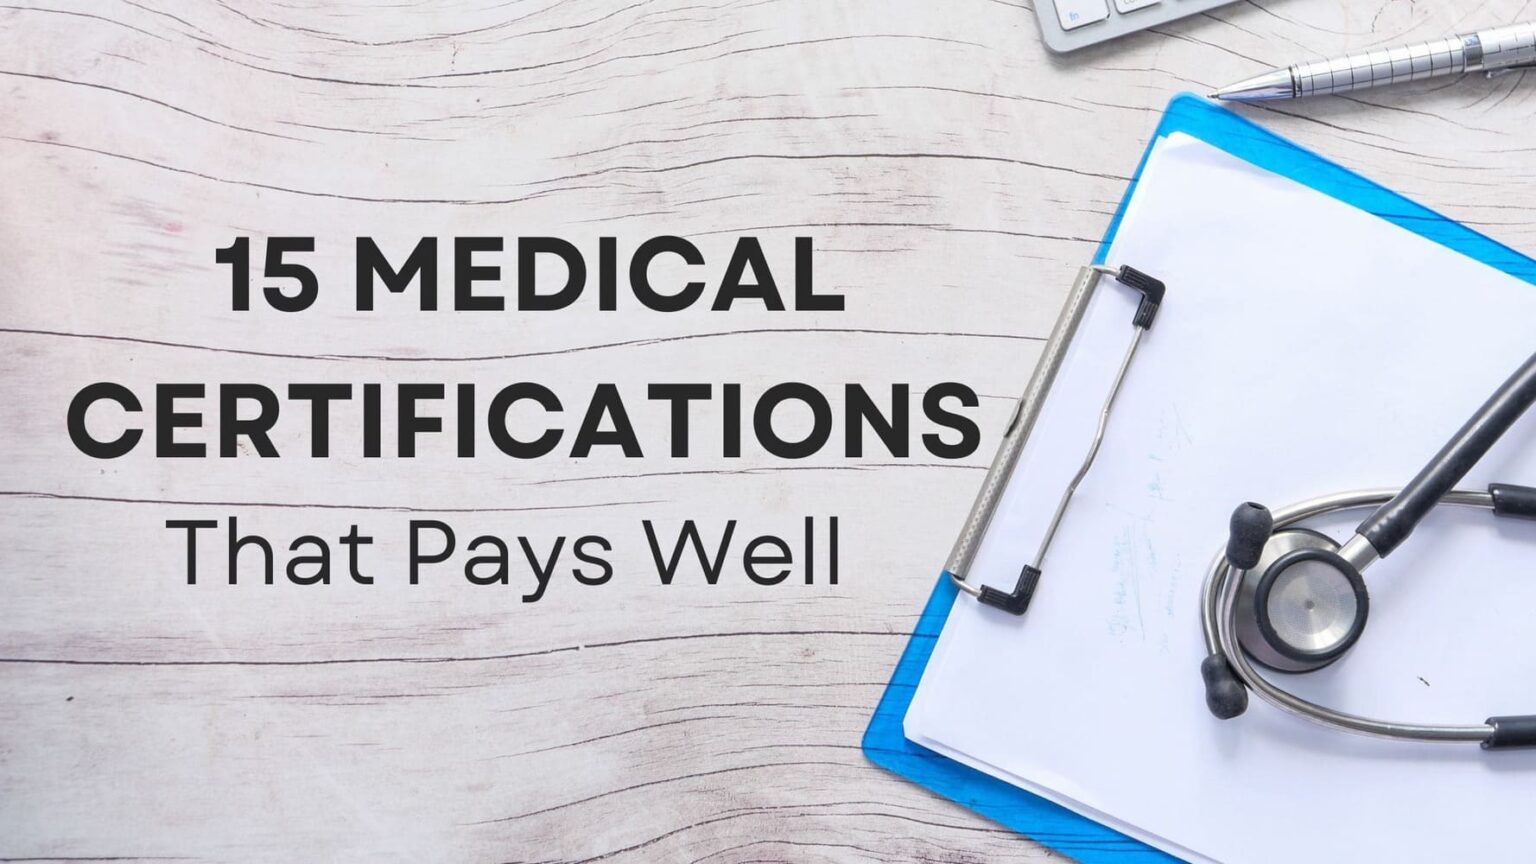 15 Medical Certifications That Pays Well (2023 Salaries) 2Study